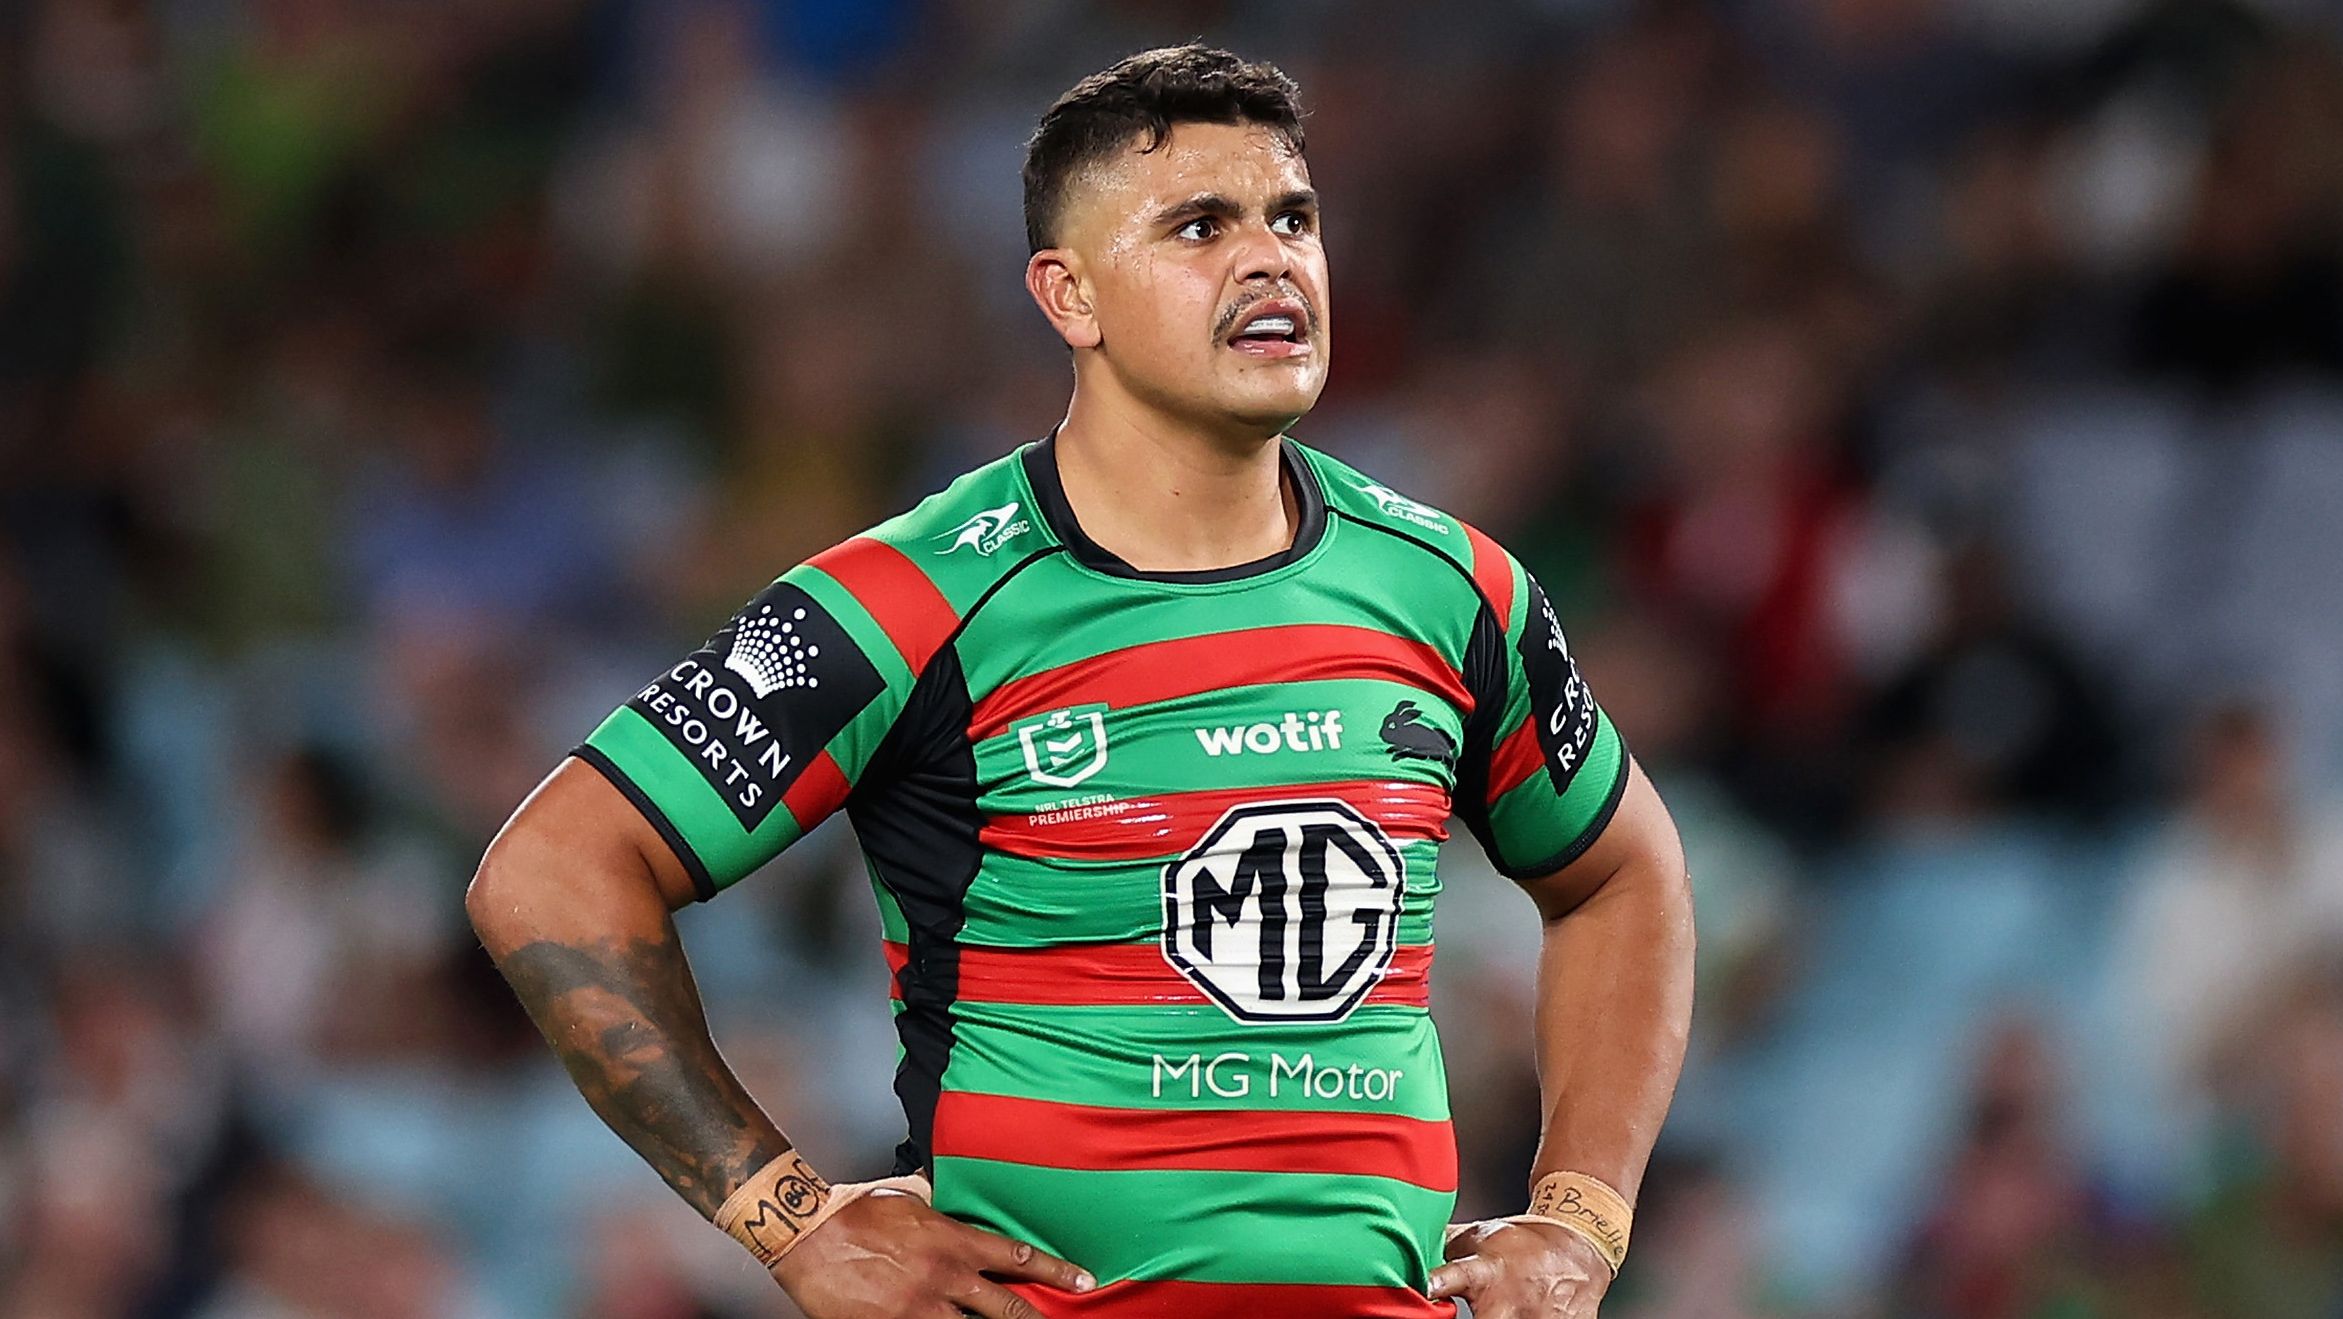 SYDNEY, AUSTRALIA - MARCH 31: Latrell Mitchell of the Rabbitohs looks on during the round five NRL match between the South Sydney Rabbitohs and Melbourne Storm at Accor Stadium on March 31, 2023 in Sydney, Australia. (Photo by Cameron Spencer/Getty Images)